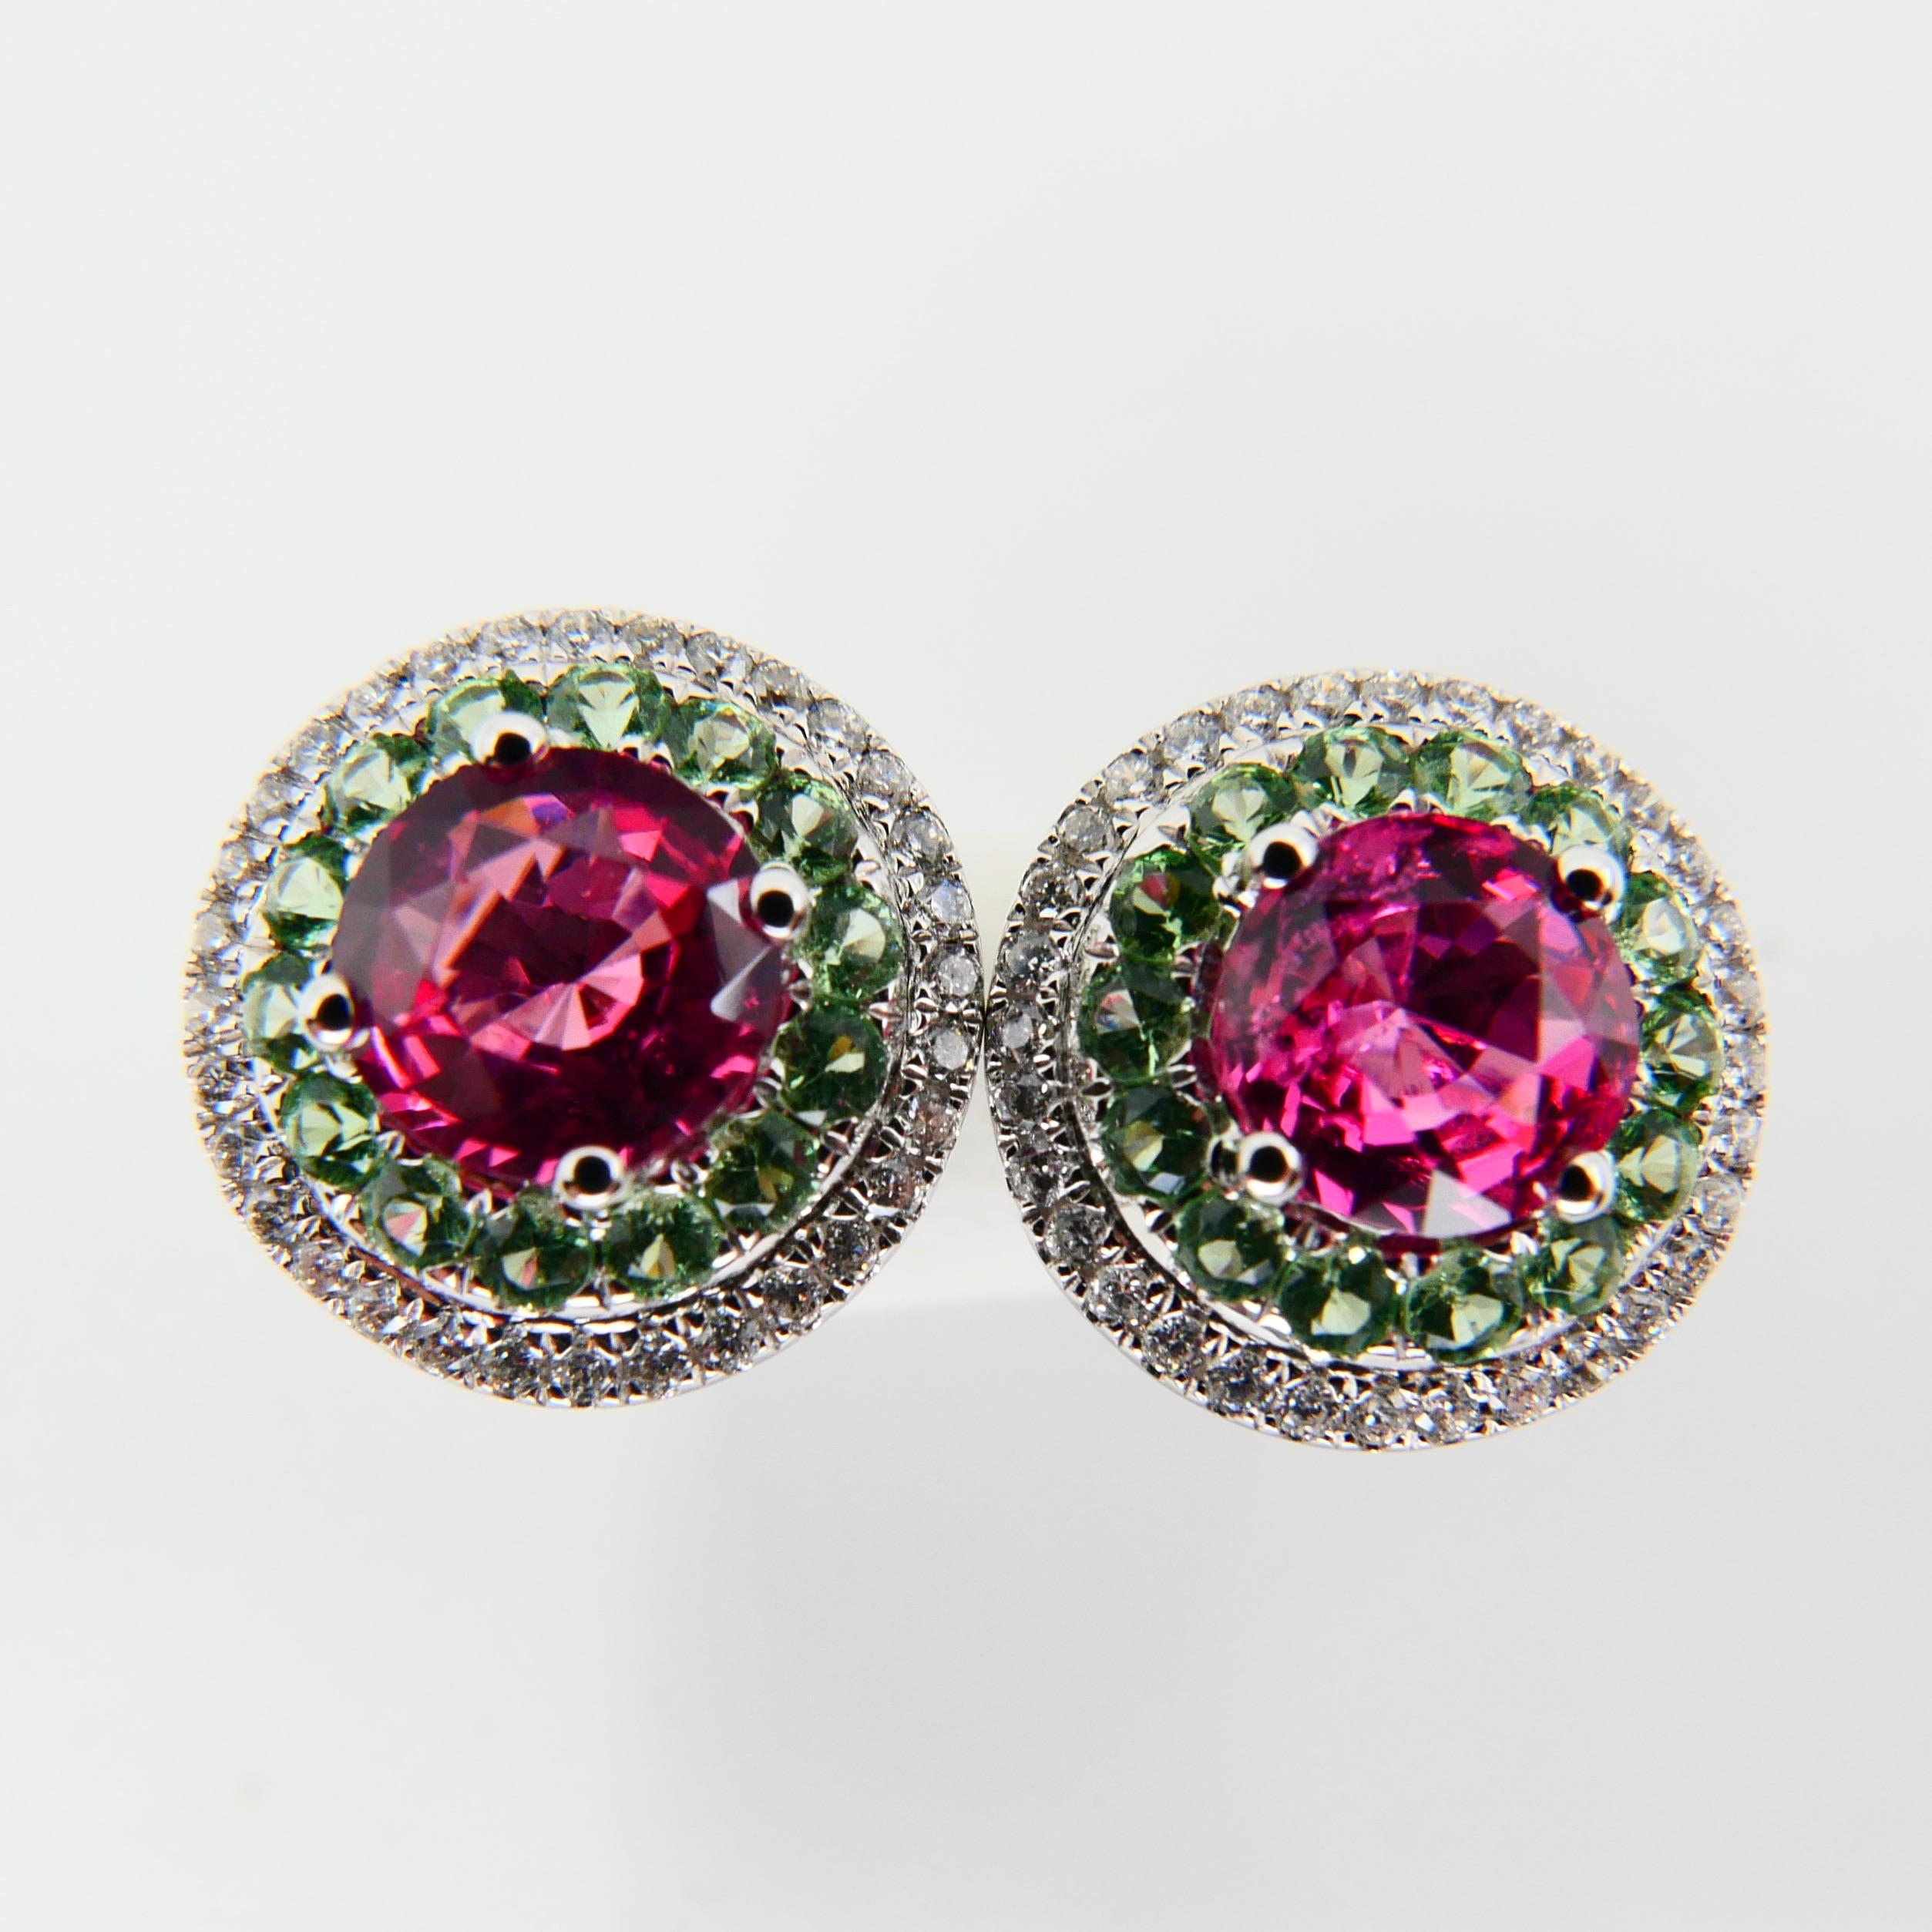 Natural 1.53 Carat Vivid Neon Pink Spinel Peridot and Diamond Earrings, 18k Gold 2